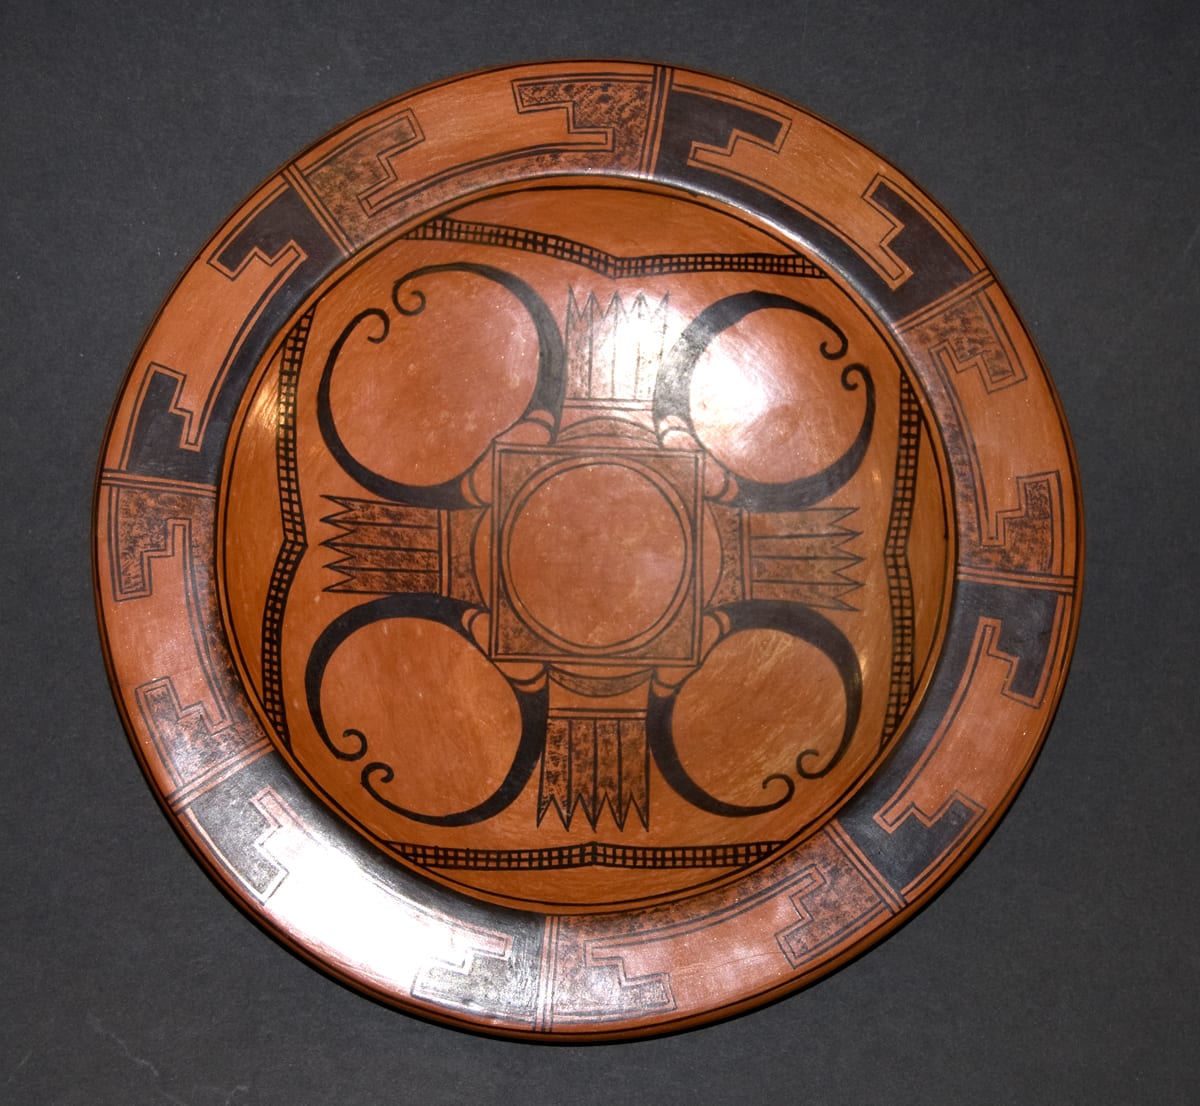 2008-16 Redware Plate with Projection of Polacca Pot